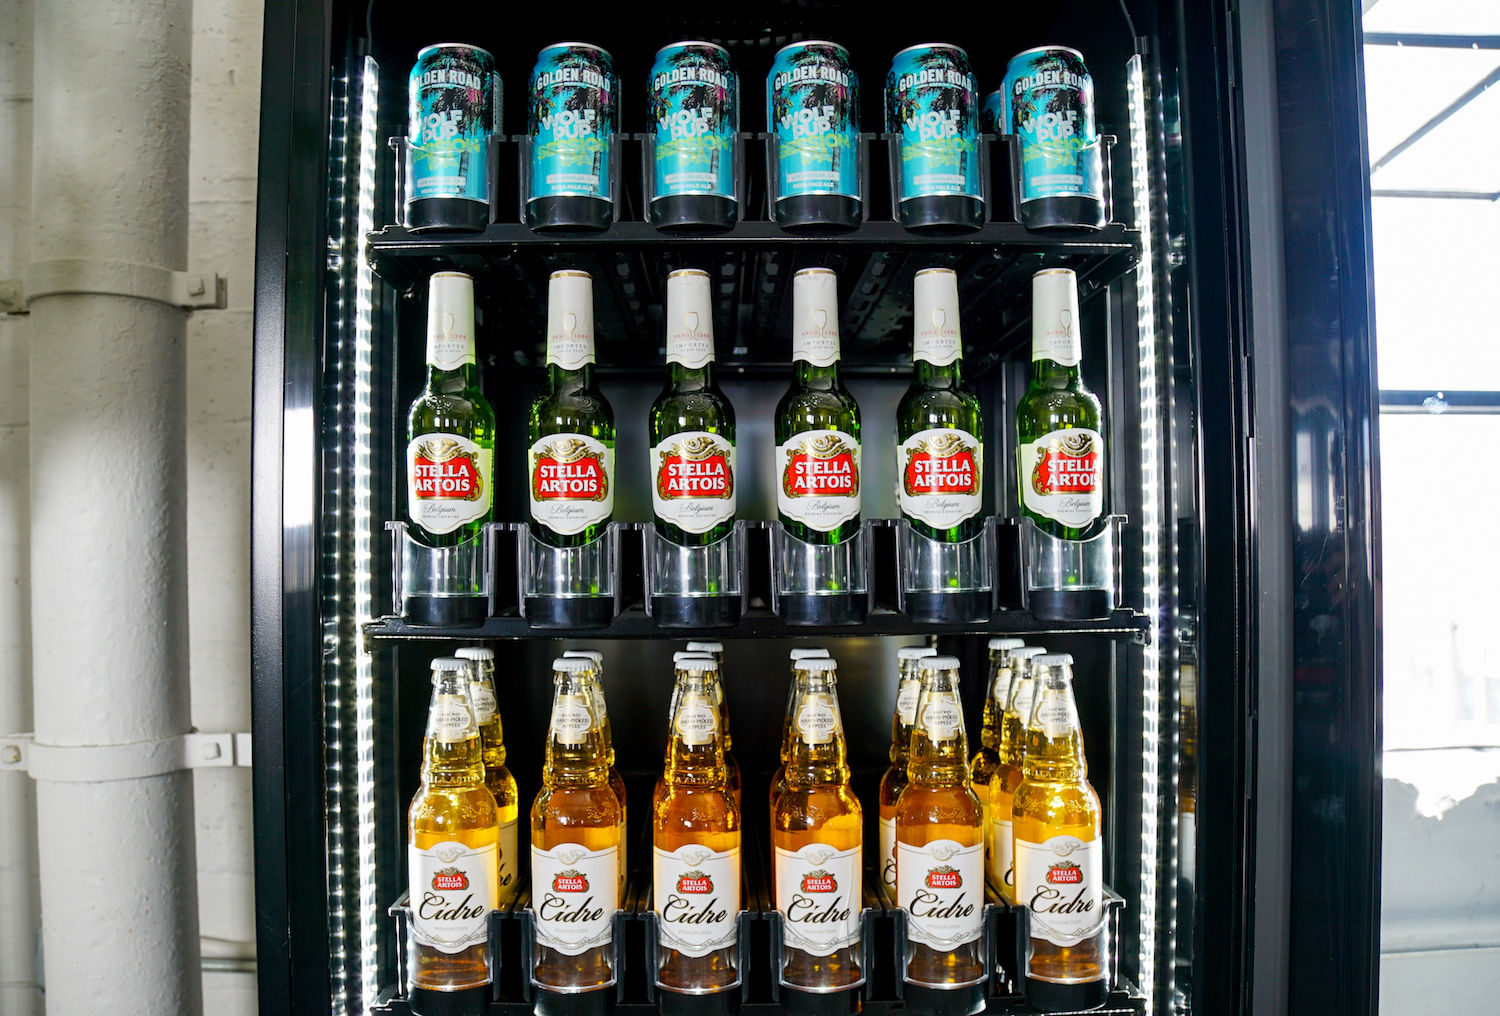 The Office Bud-e is also available in Chicago and New York City, and coming to Los Angeles soon. (Courtesy Anheuser-Busch)